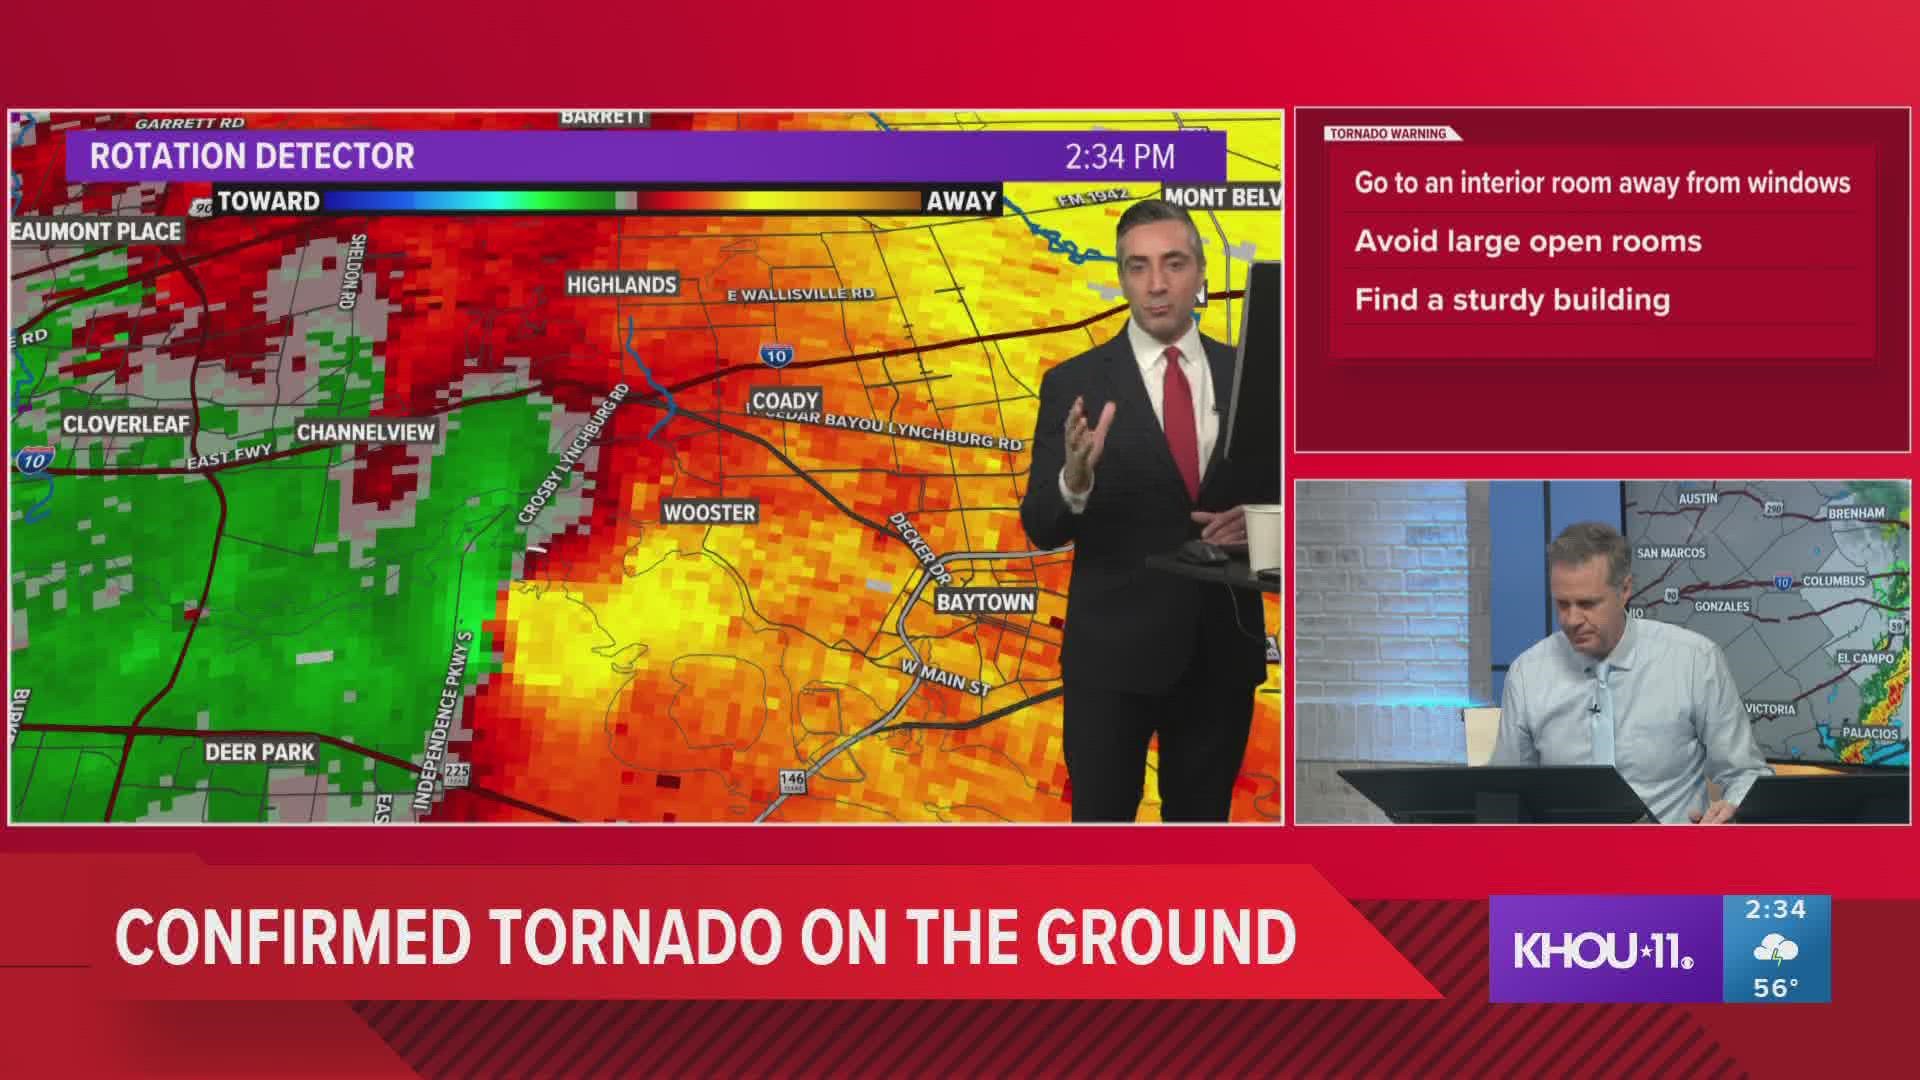 KHOU 11 meteorologists David Paul and Tim Pandajis tracked a tornado as it moved through the Houston area on Jan. 24, 2023.